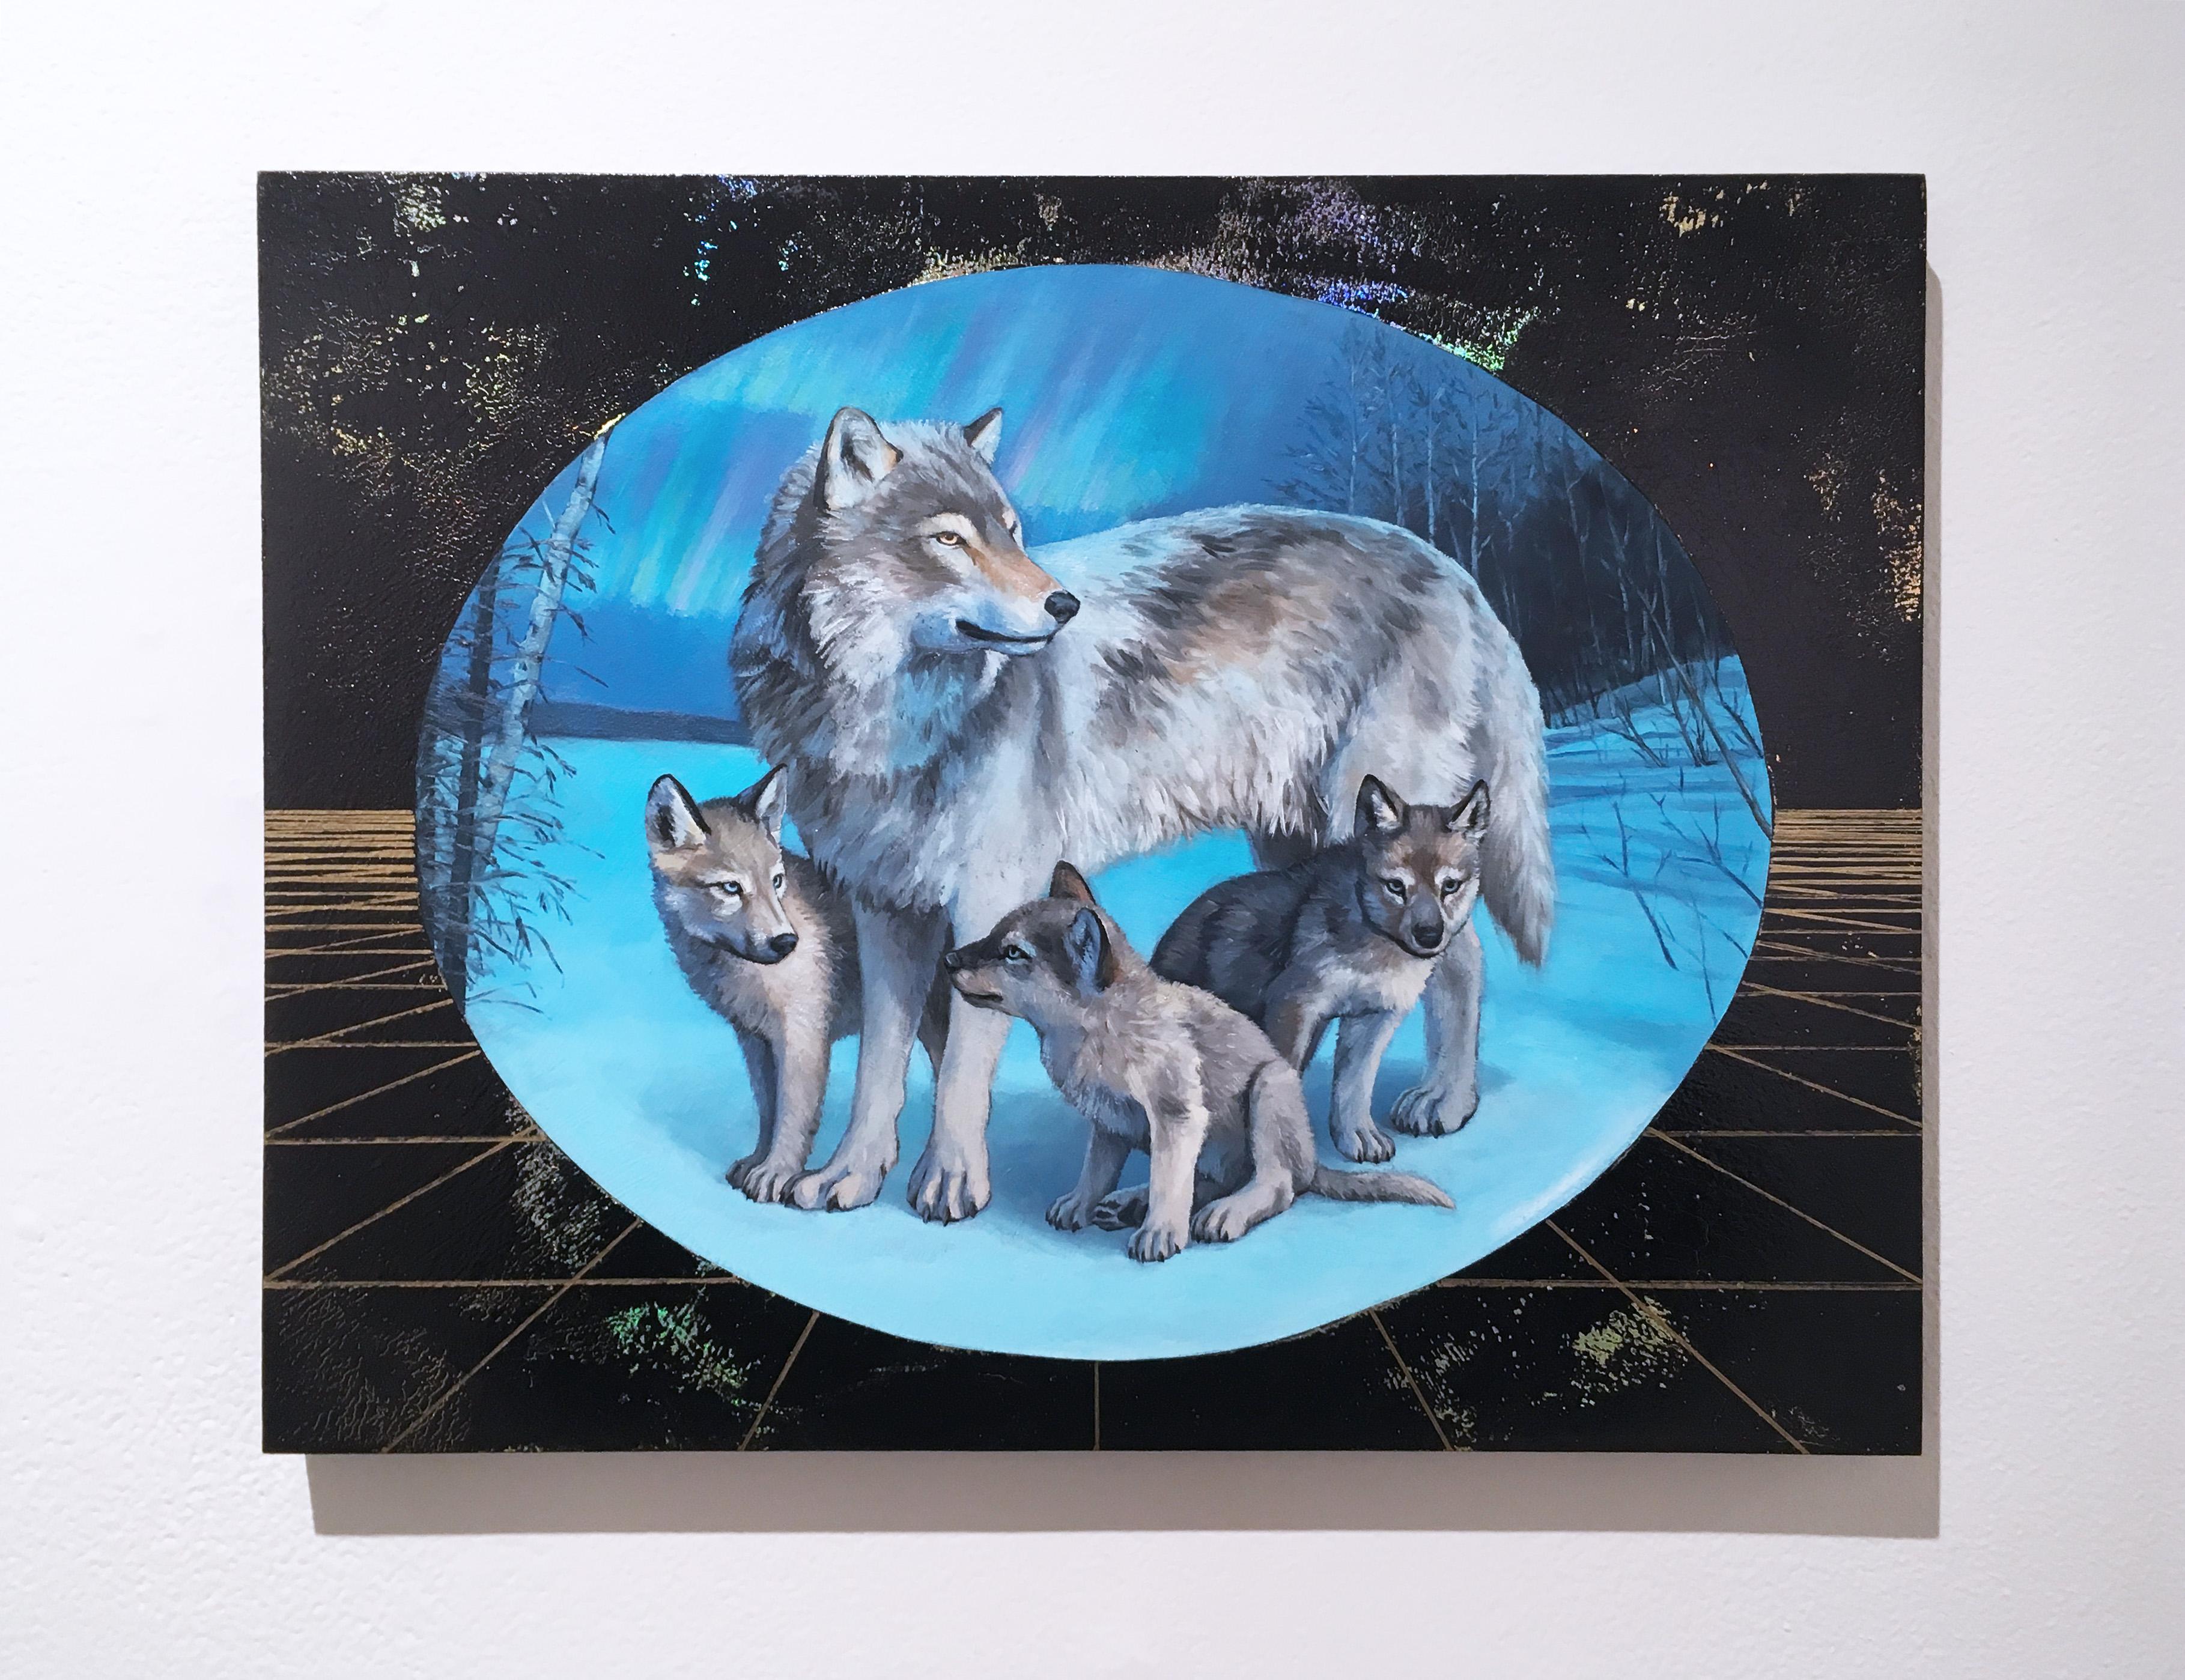 Morning Star, oil, metallic foil, wolf, painting, figurative, animals, landscape - Painting by Alexis Kandra